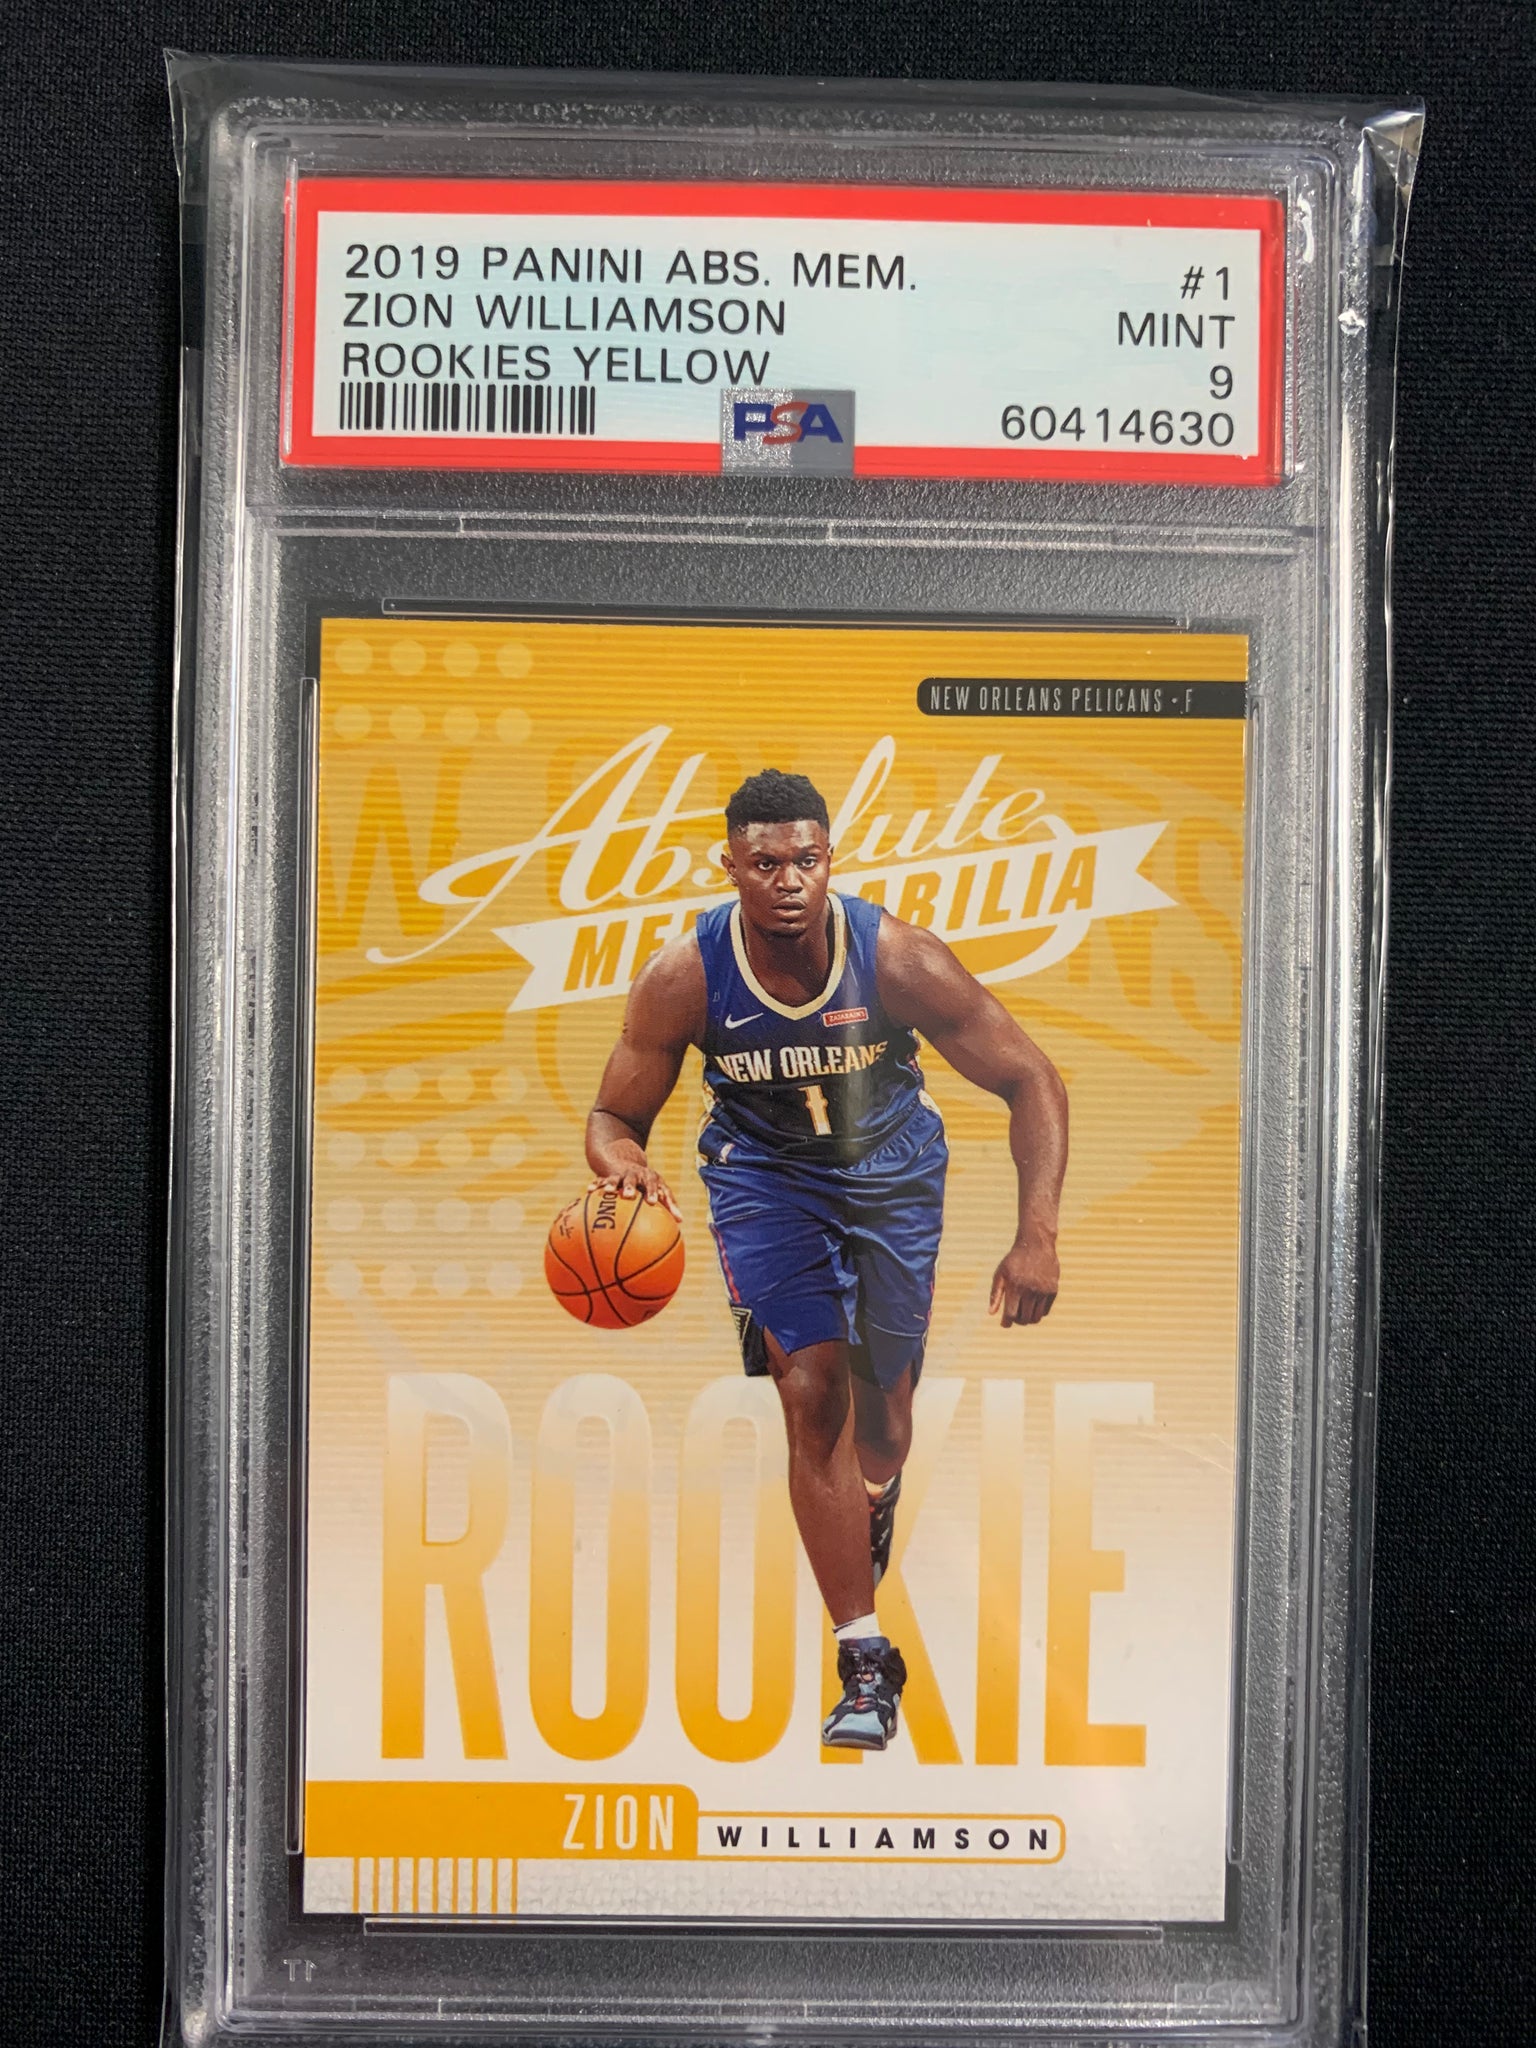 2019 PANINI ABSOLUTE NBA BASKETBALL #1 NEW ORLEANS PELICANS - ZION WILLIAMSON ROOKIES YELLOW GRADED PSA 9 MINT